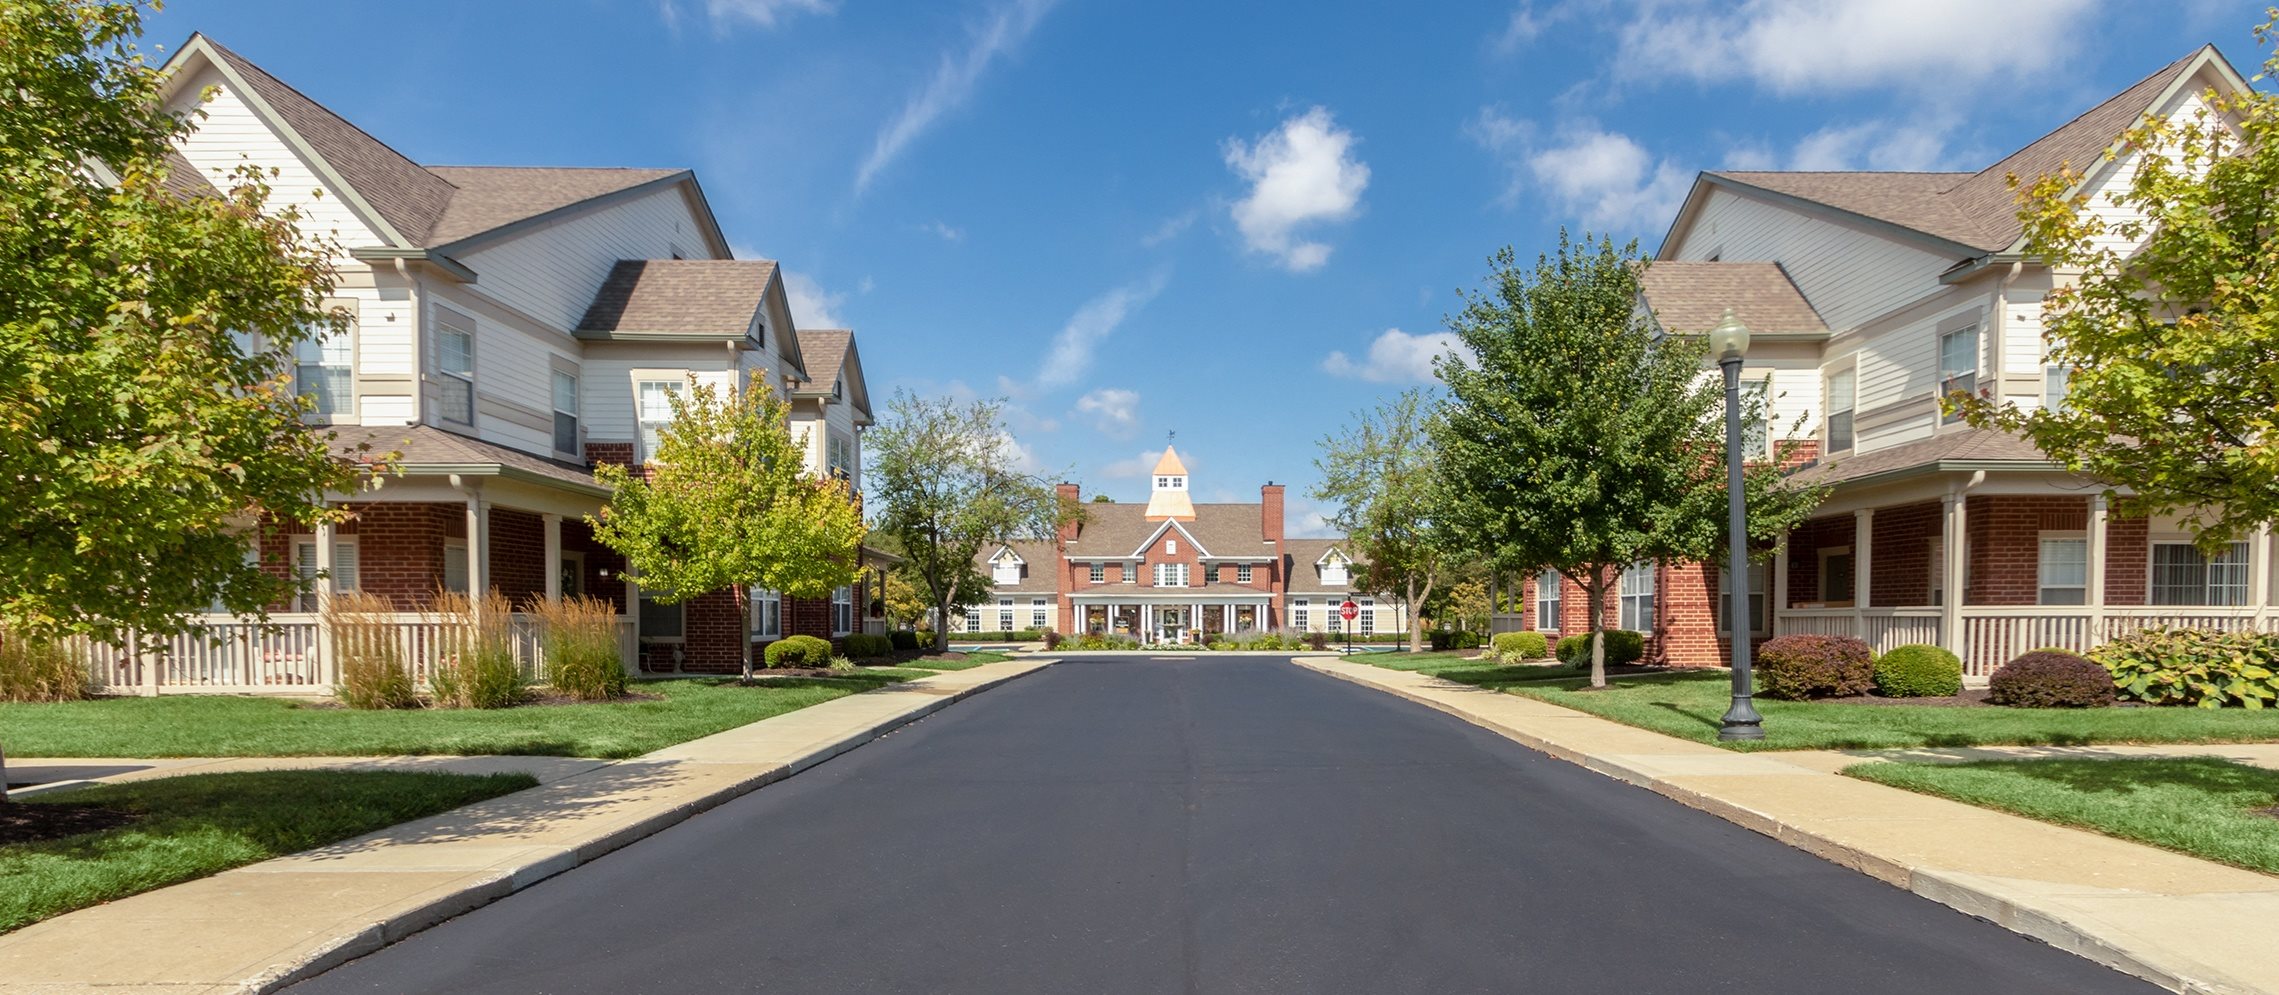 This is a photo of apartment exteriors from the road leading up to the Leasing Office at The Sanctuary at Fishers in Fishers, IN.